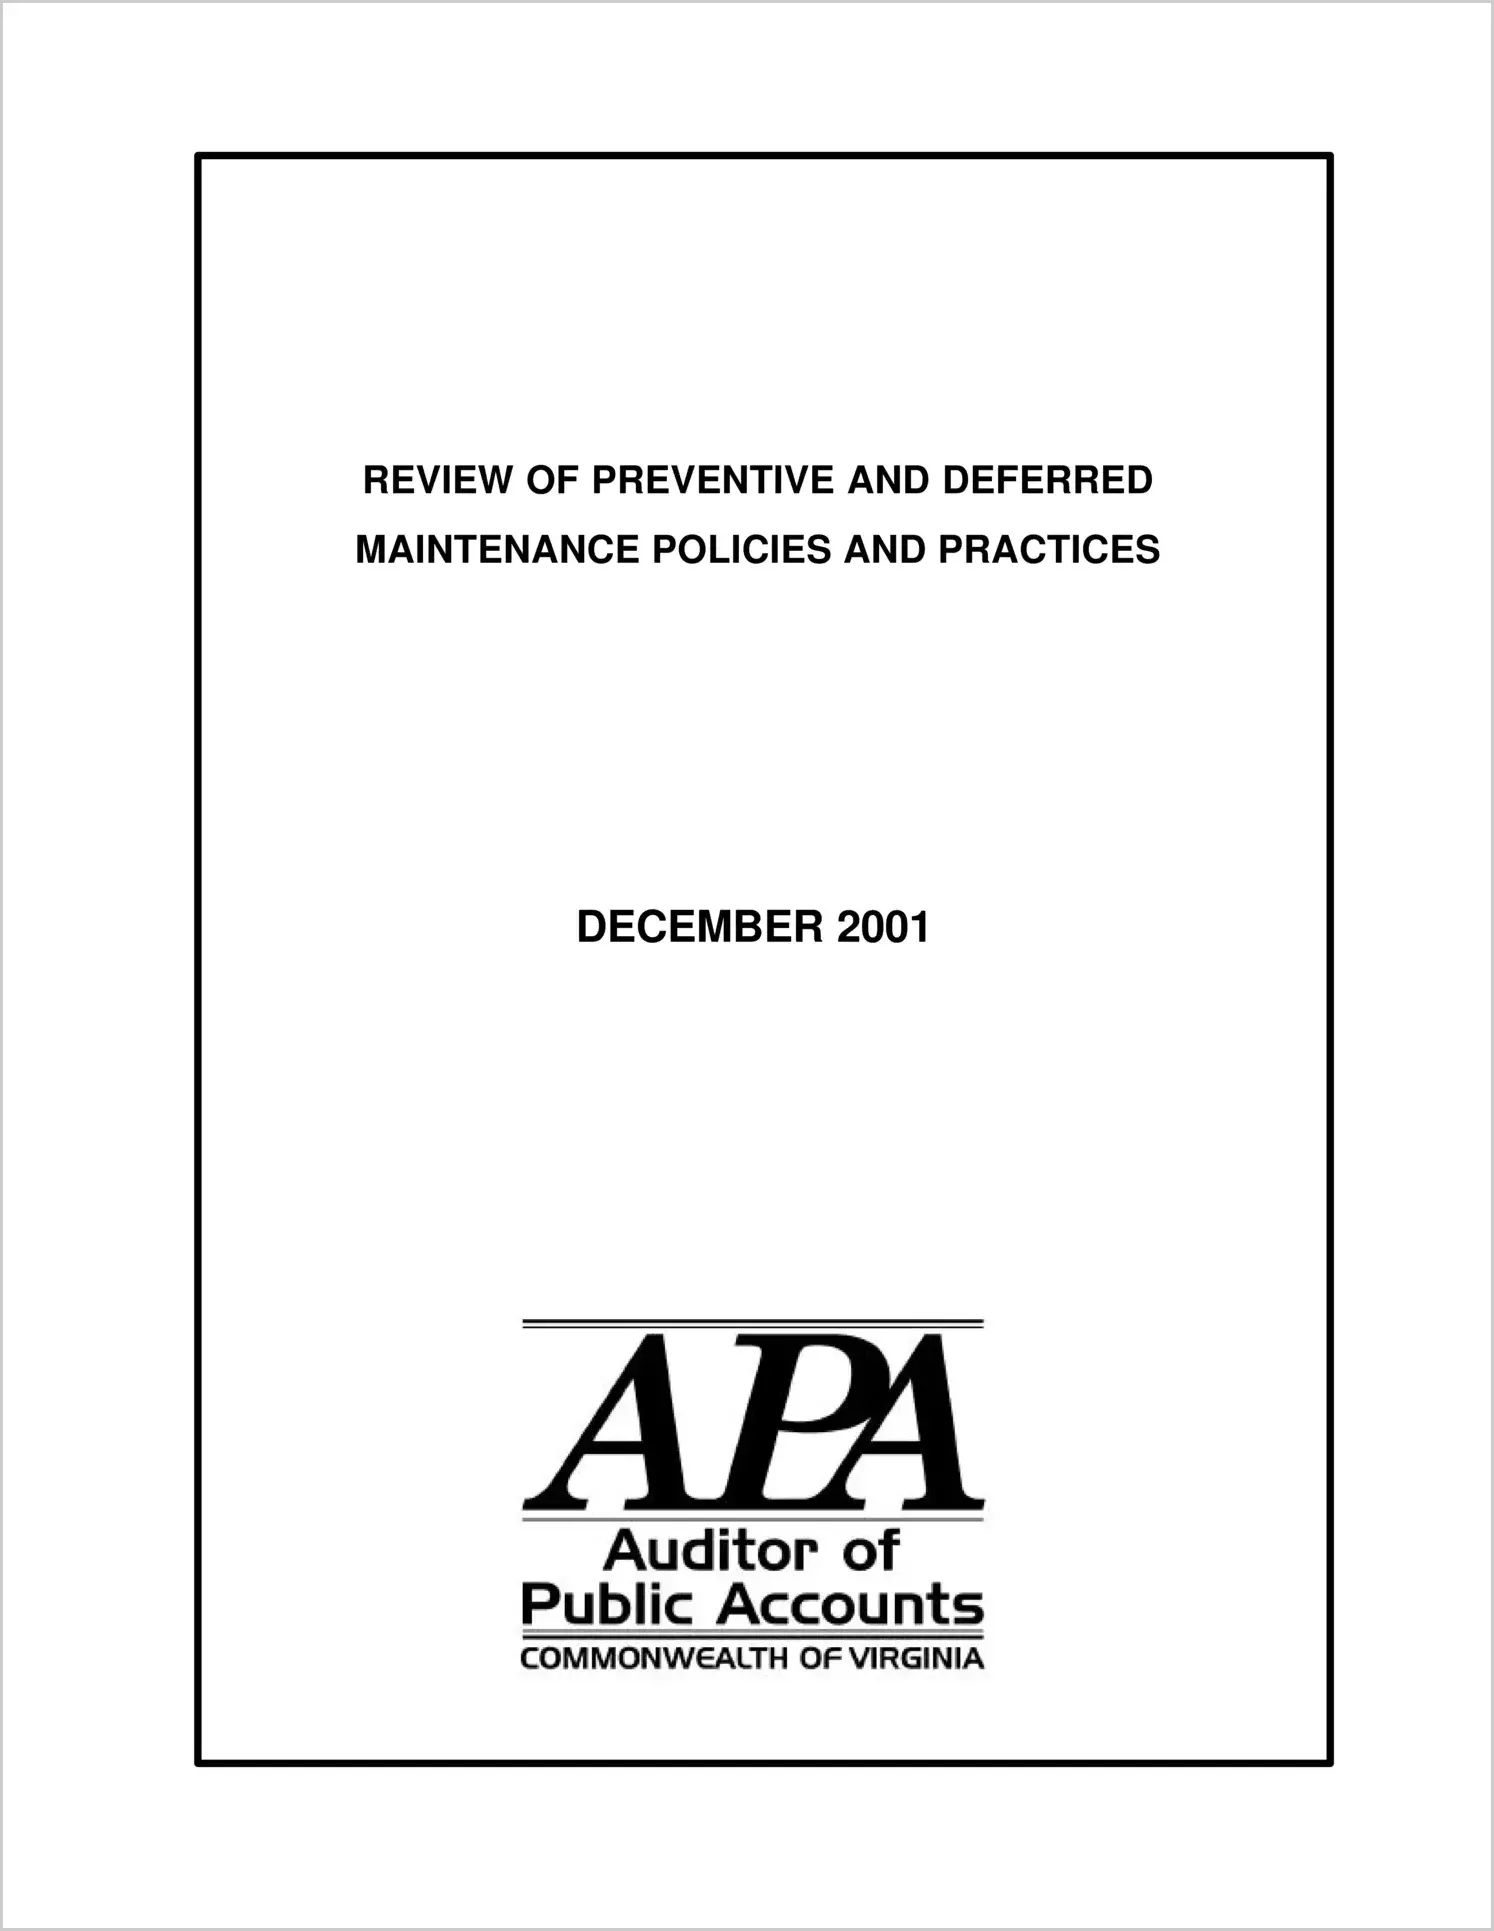 Special ReportReview of Preventive and Deferred Maintenance Policies and Practices(Report Date: 12/4/2001)